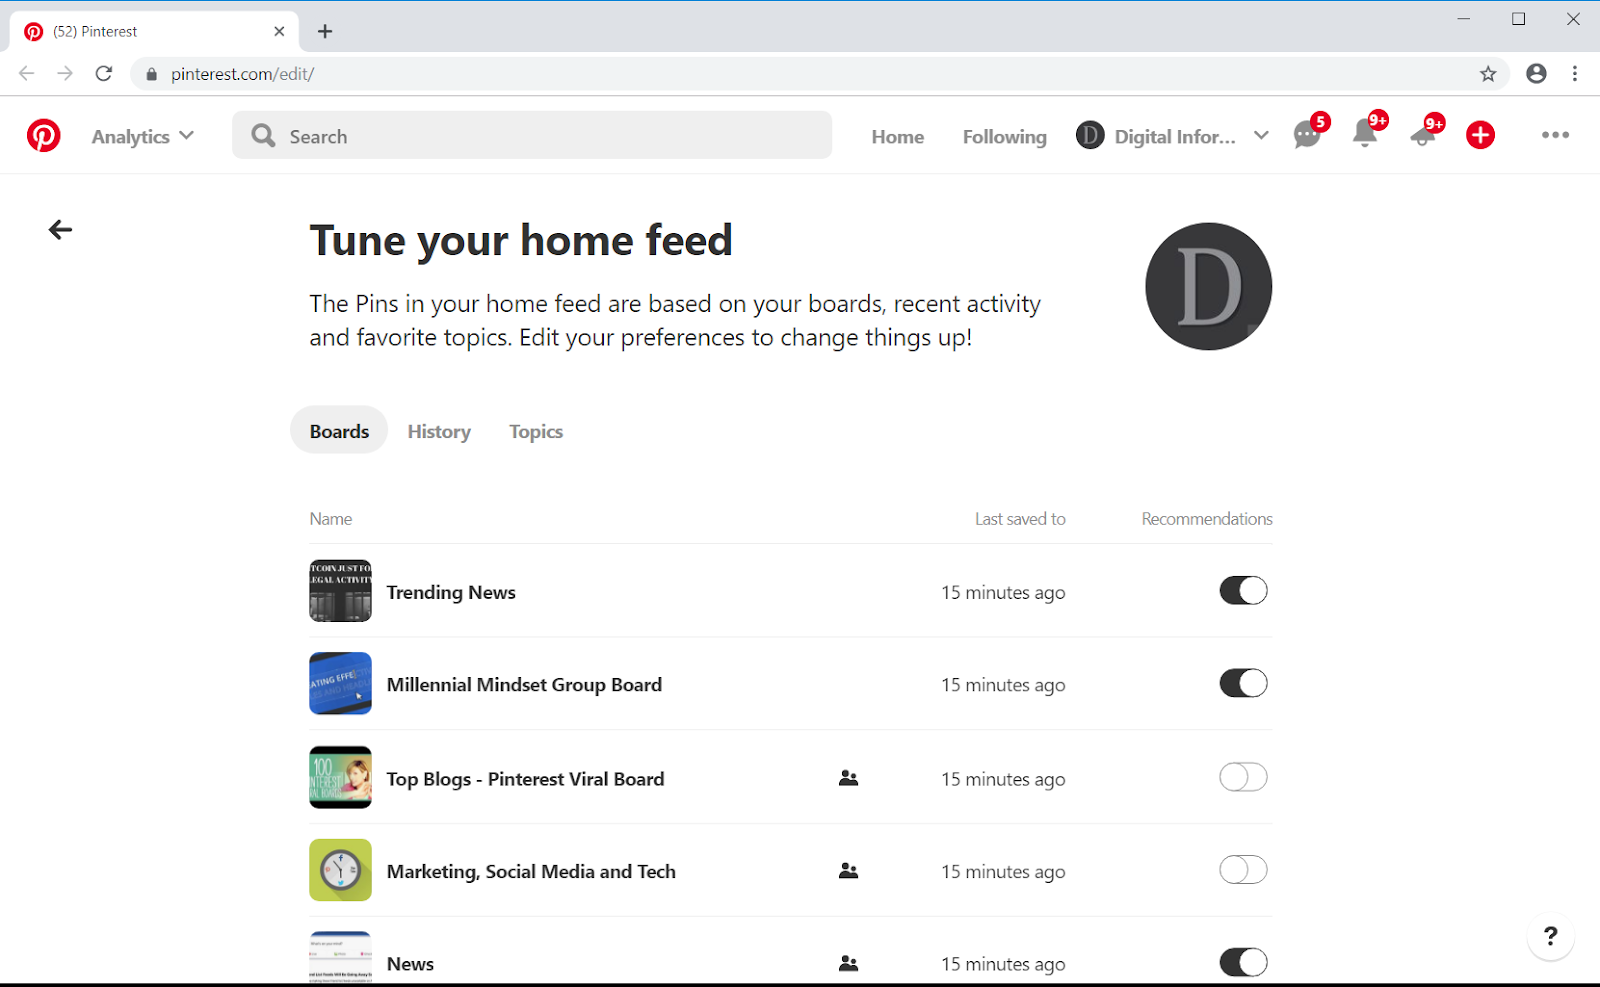 With the home feed tuner you can: Toggle home feed recommendations on and off, Flip on or off if you want to see more ideas, Receive recommendations for secret boards